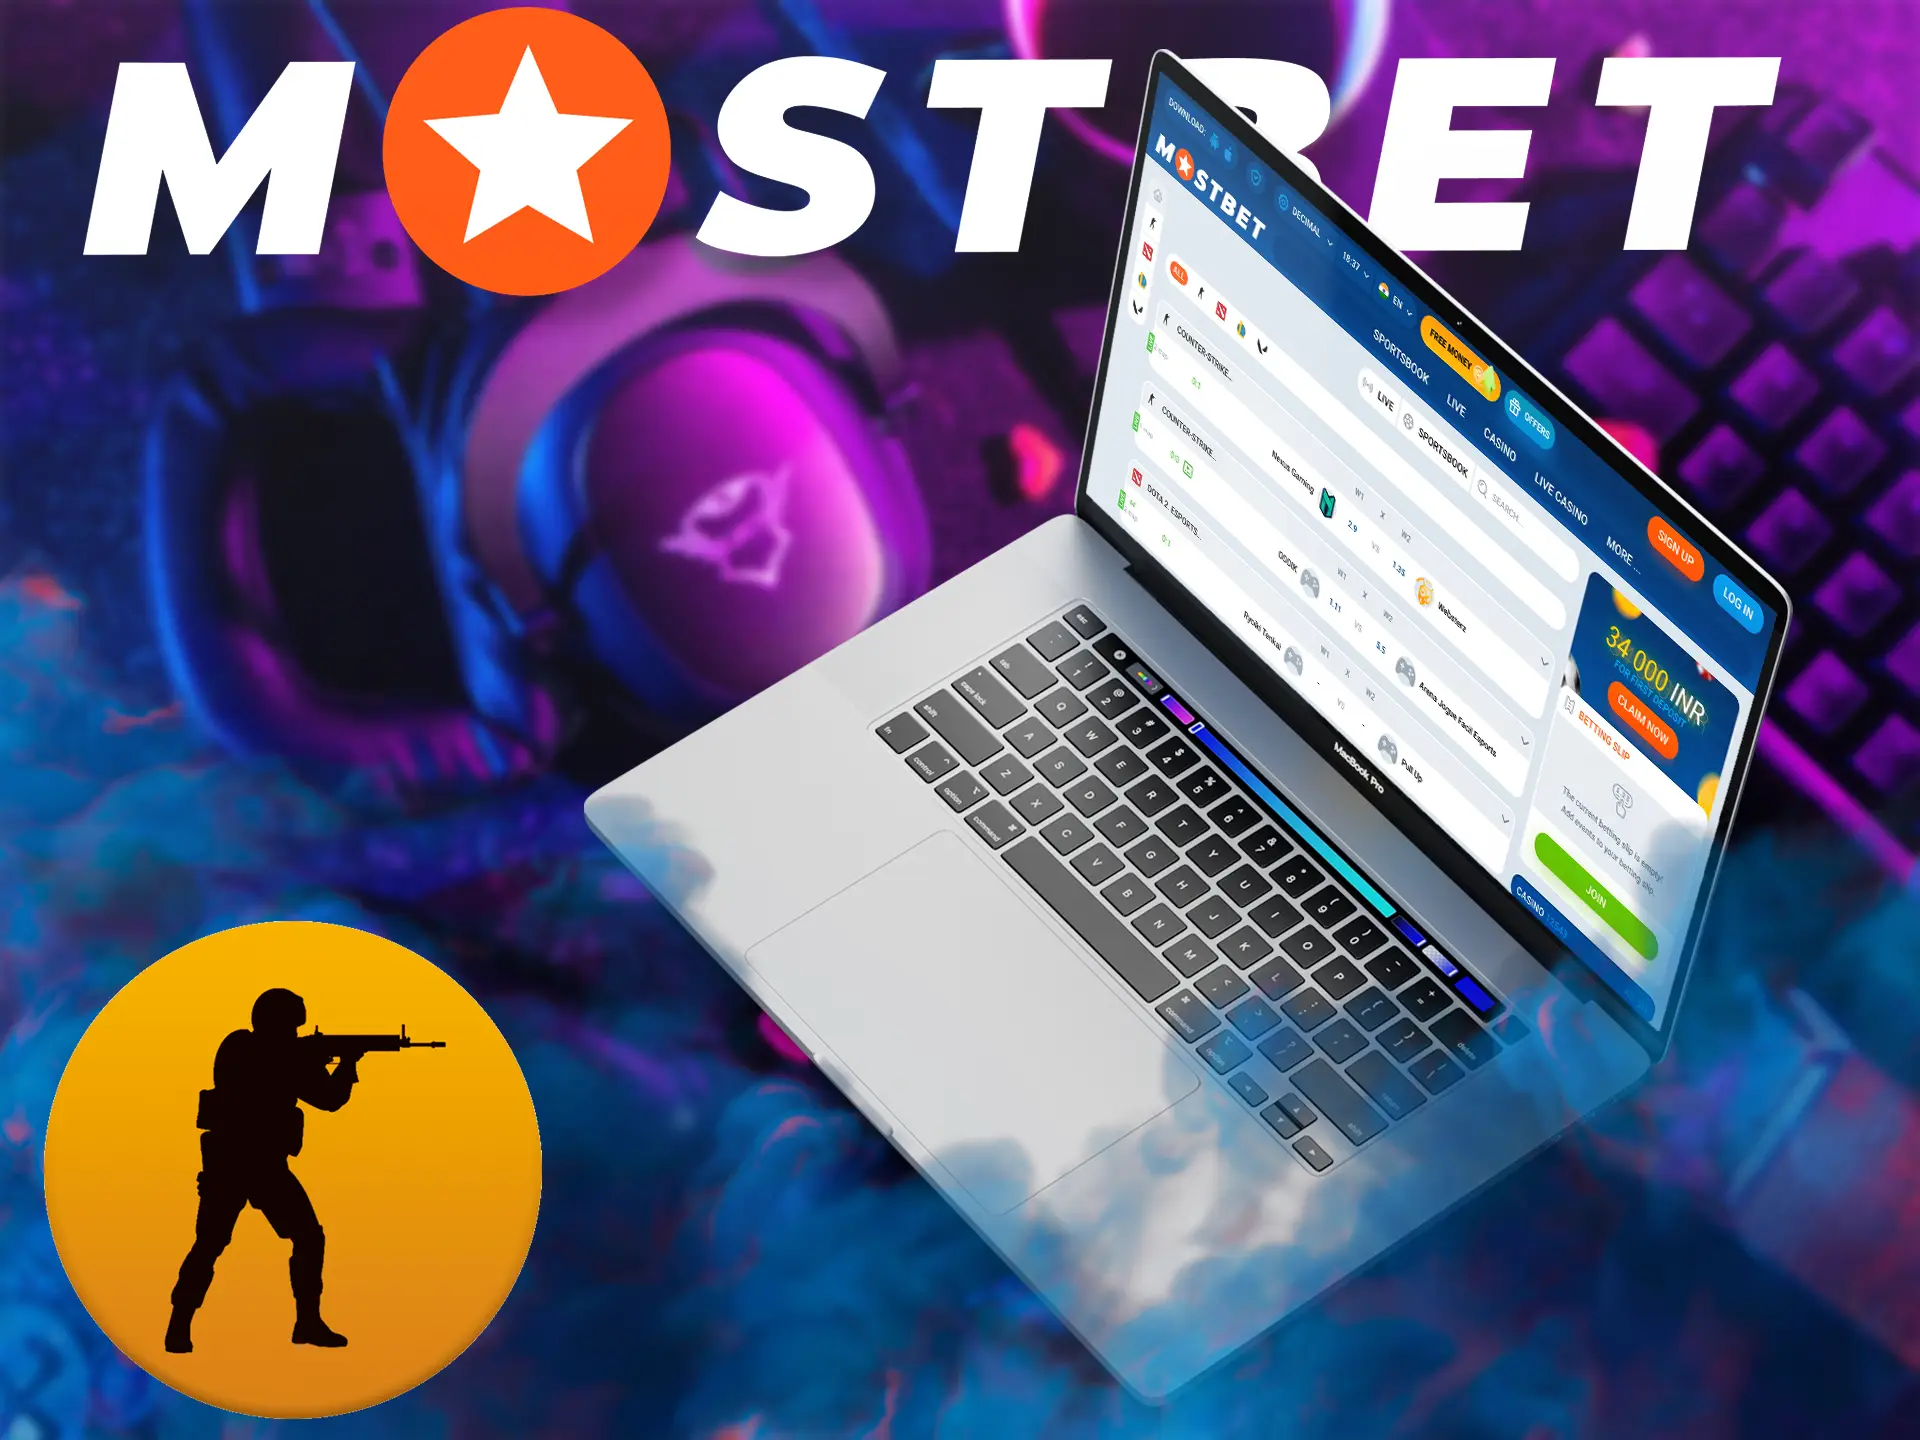 Bet on a very promising trend that has been gaining popularity dramatically in recent years with the Mostbet platform helping you to do just that.